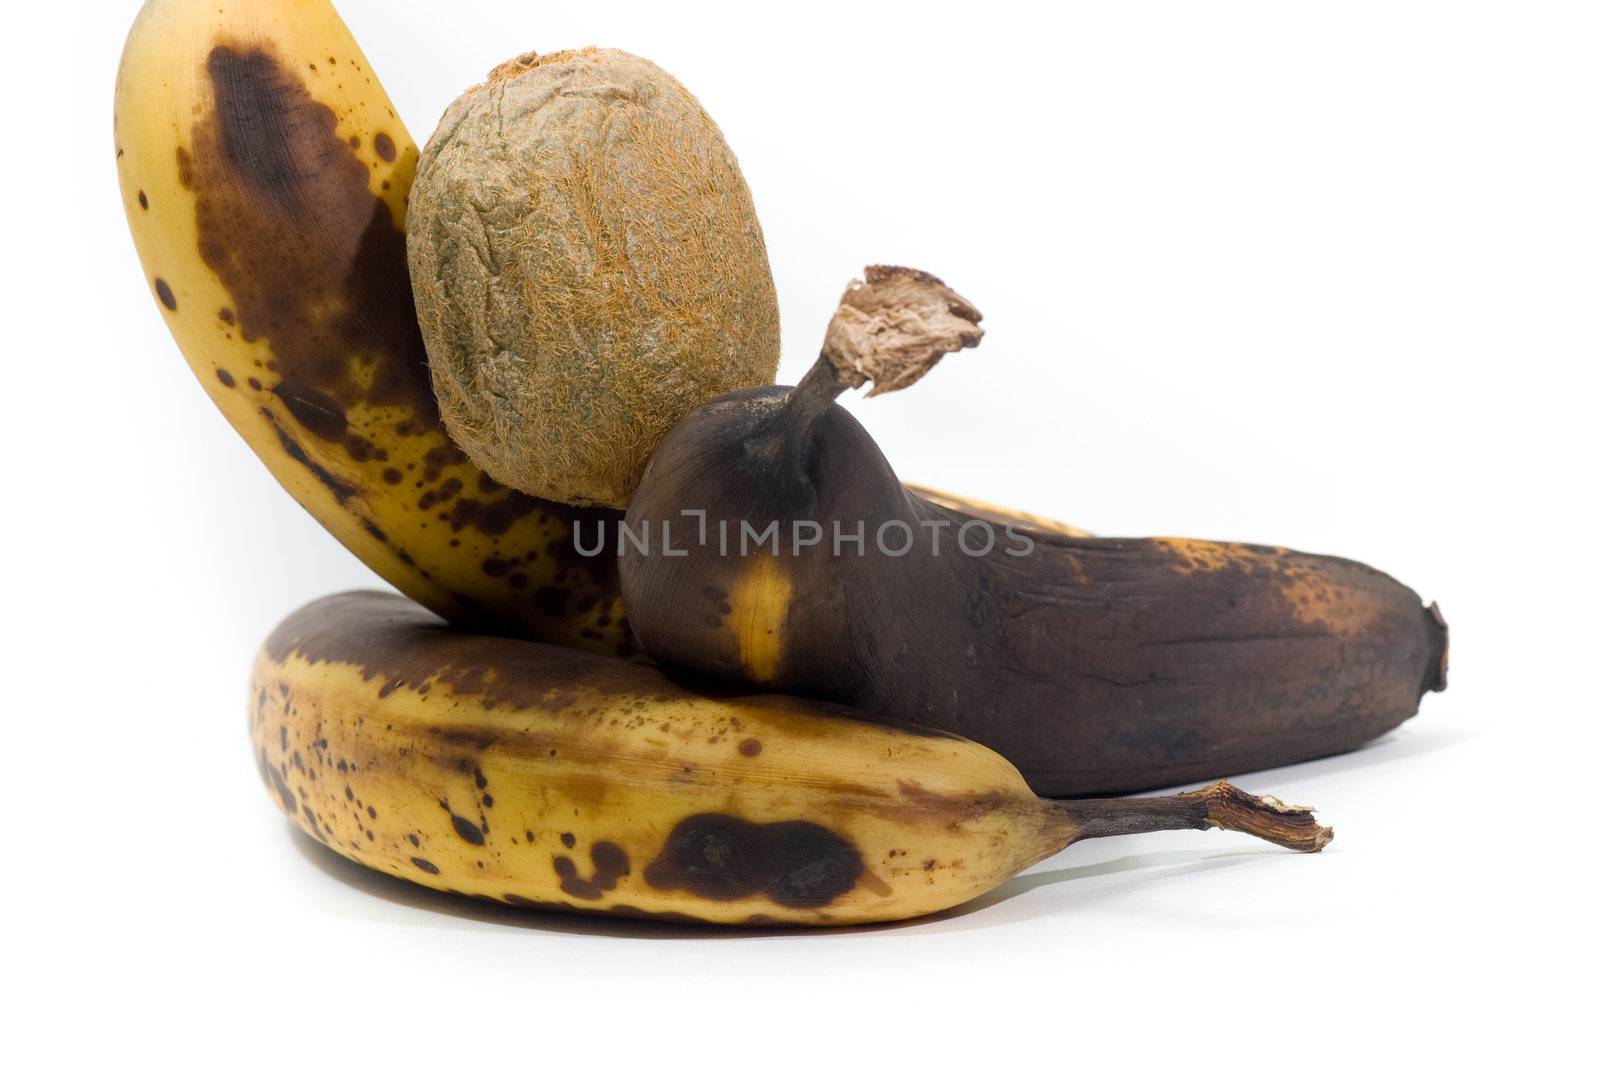 3 over-ripened bananas and a kiwi, isolated on white.